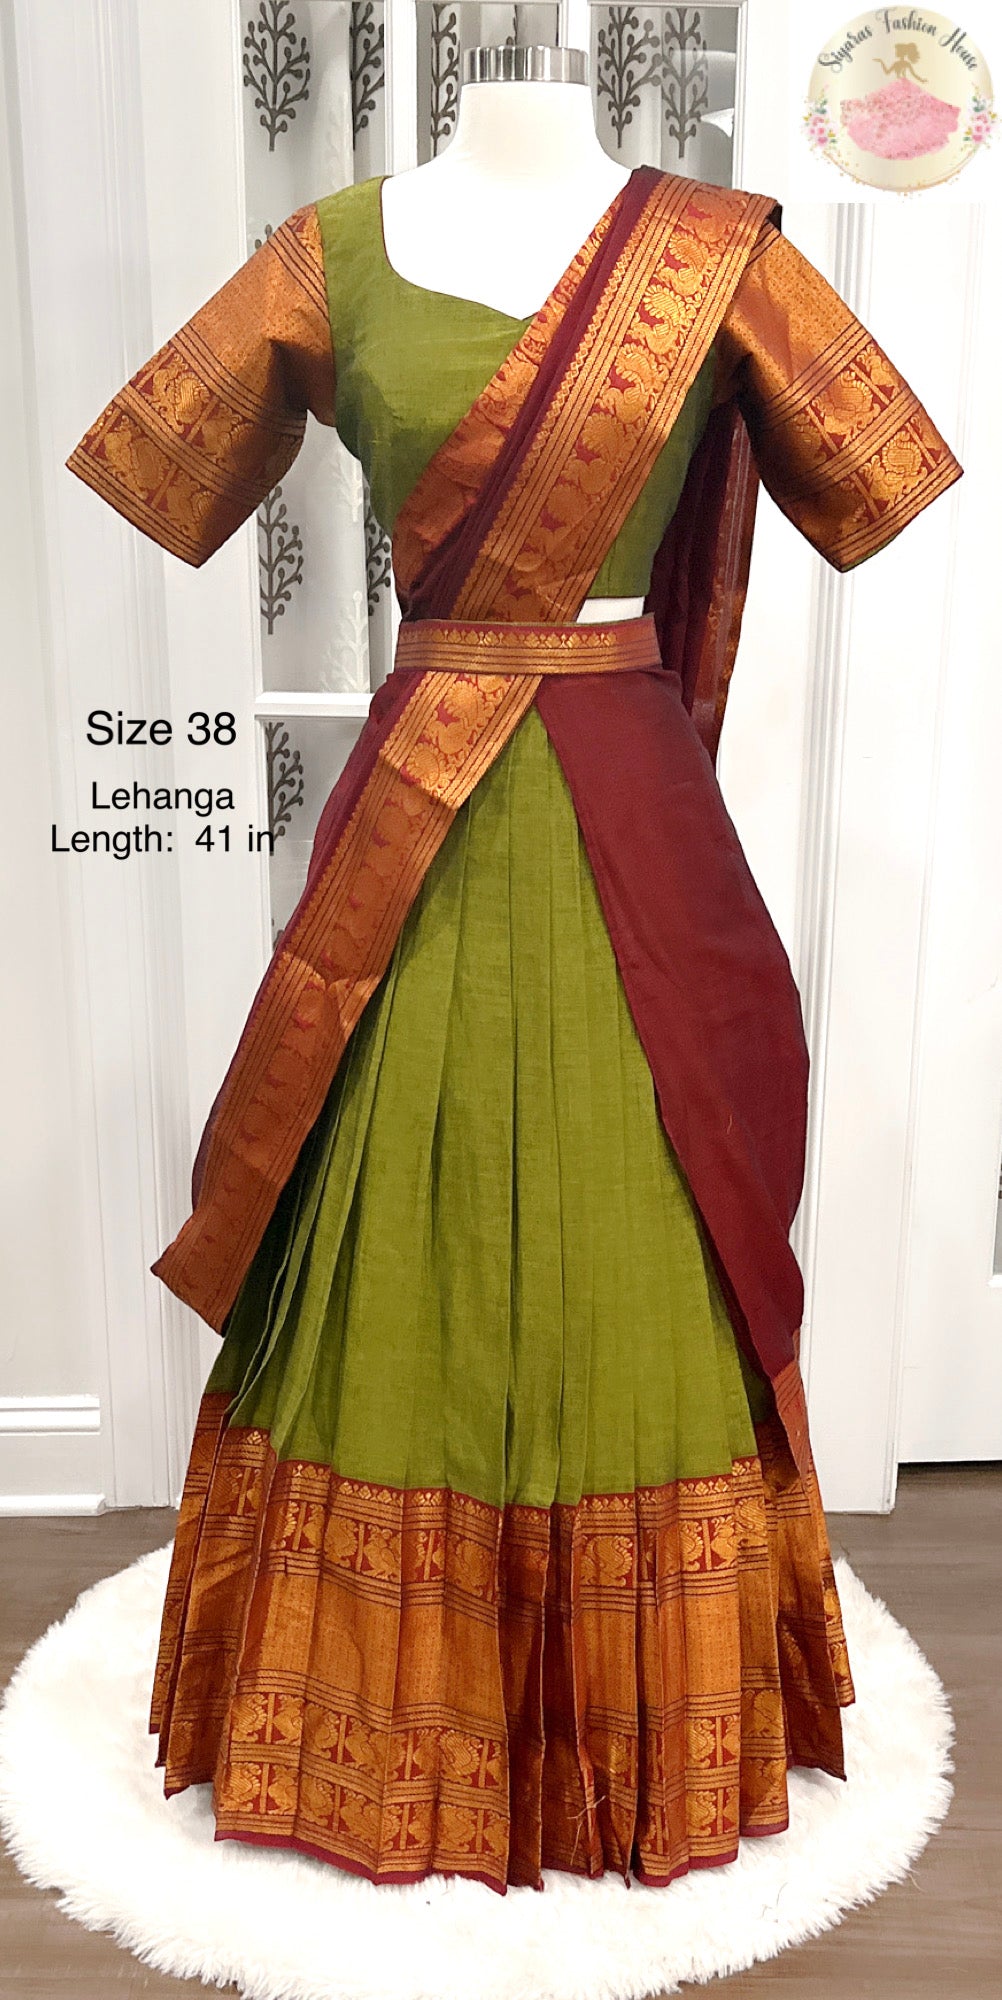 Elegant NarayanPet cotton Half Saree in parrot green and maroon color combo with zari border for Teens/Adults